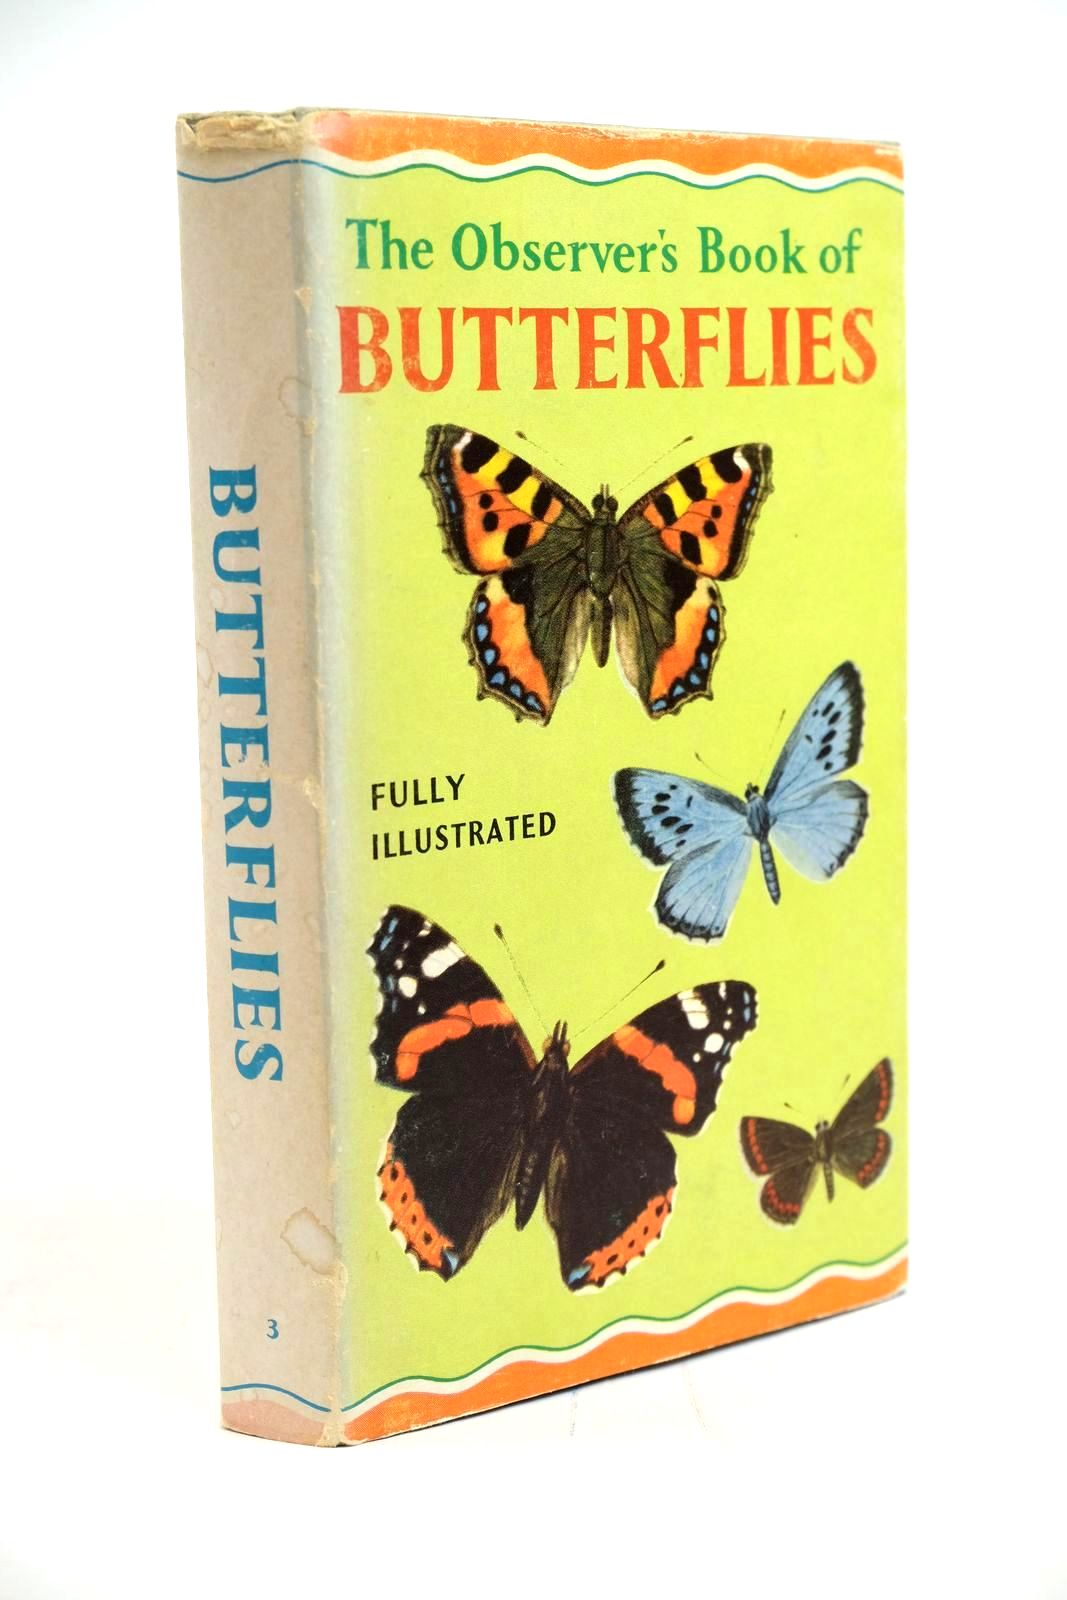 Photo of THE OBSERVER'S BOOK OF BUTTERFLIES written by Stokoe, W.J. published by Frederick Warne &amp; Co Ltd. (STOCK CODE: 1321420)  for sale by Stella & Rose's Books